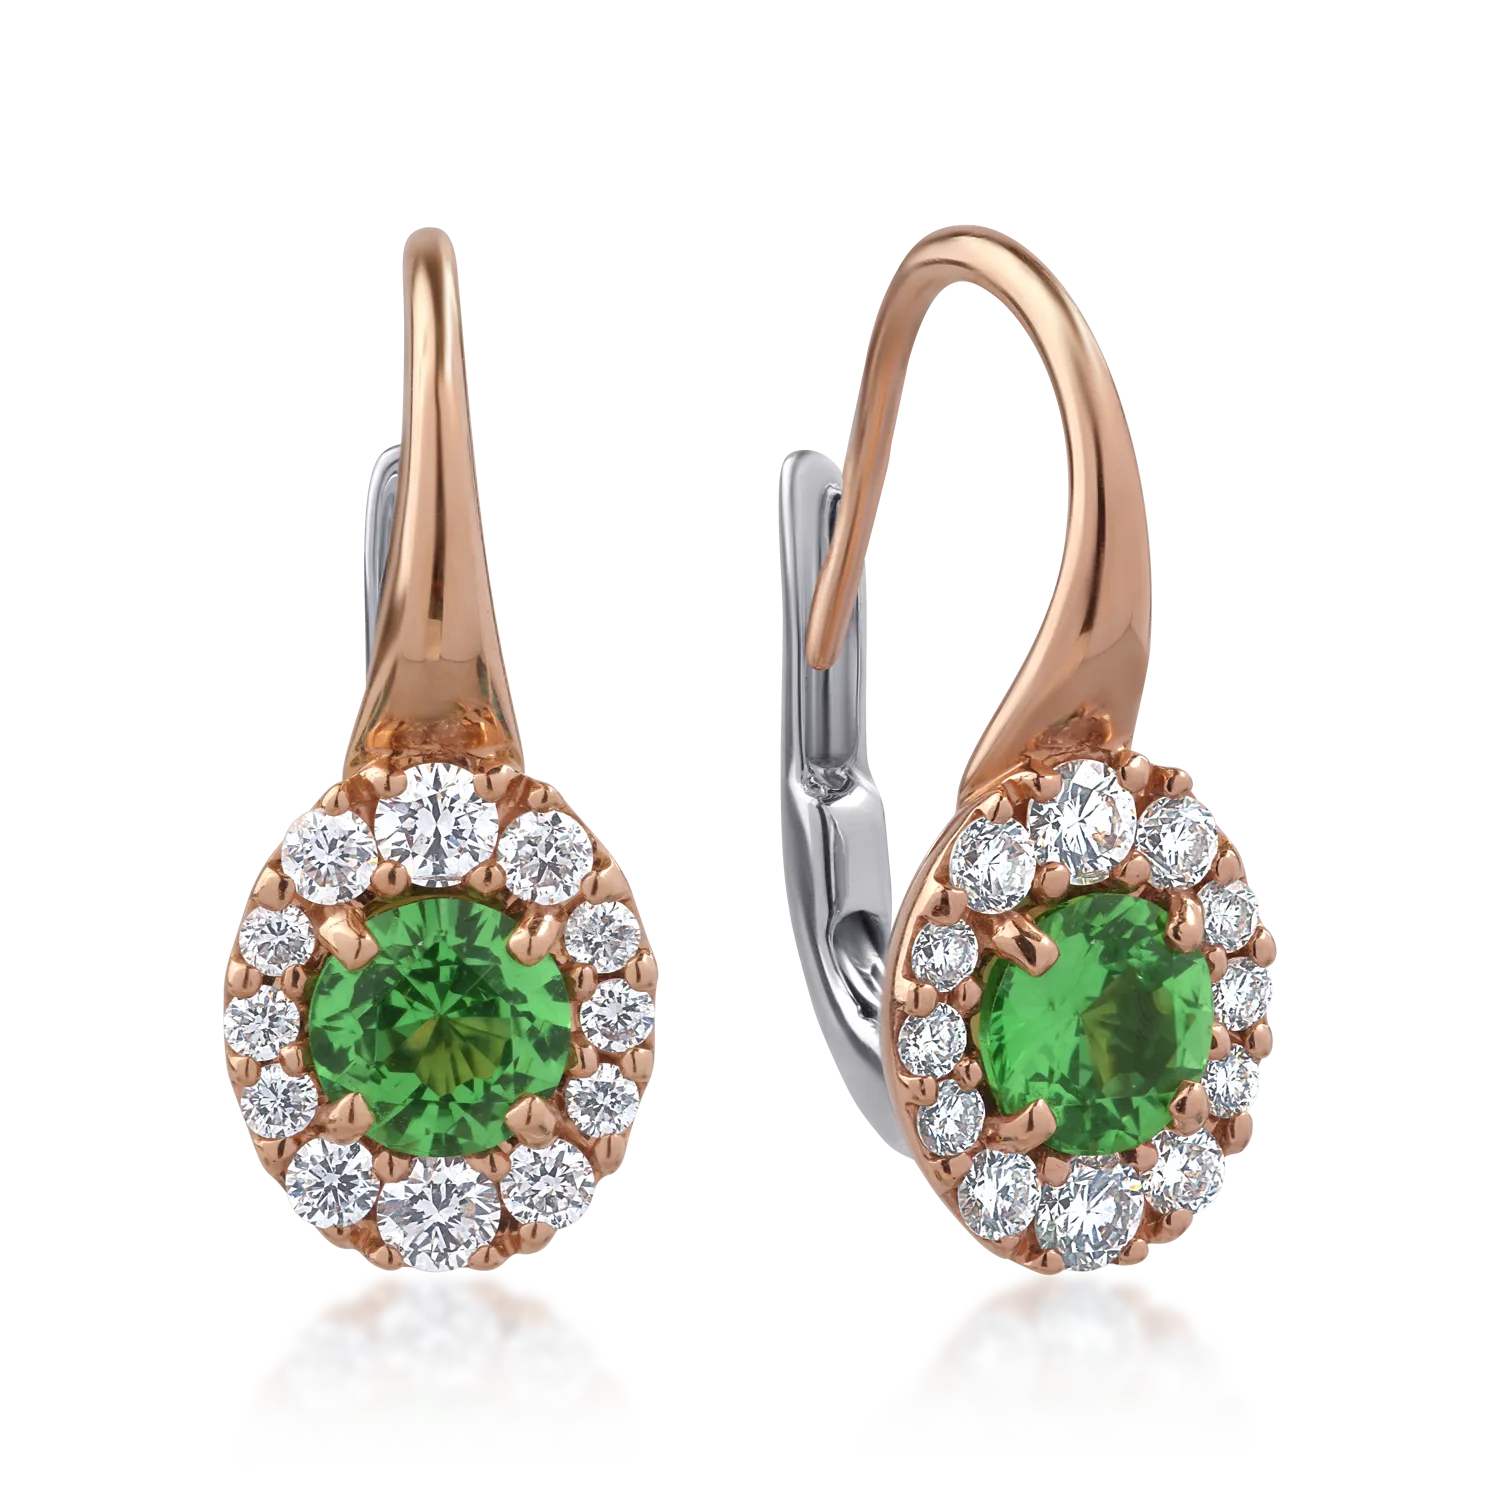 18K rose gold earrings with 0.8ct tsavorite and 0.36ct diamonds